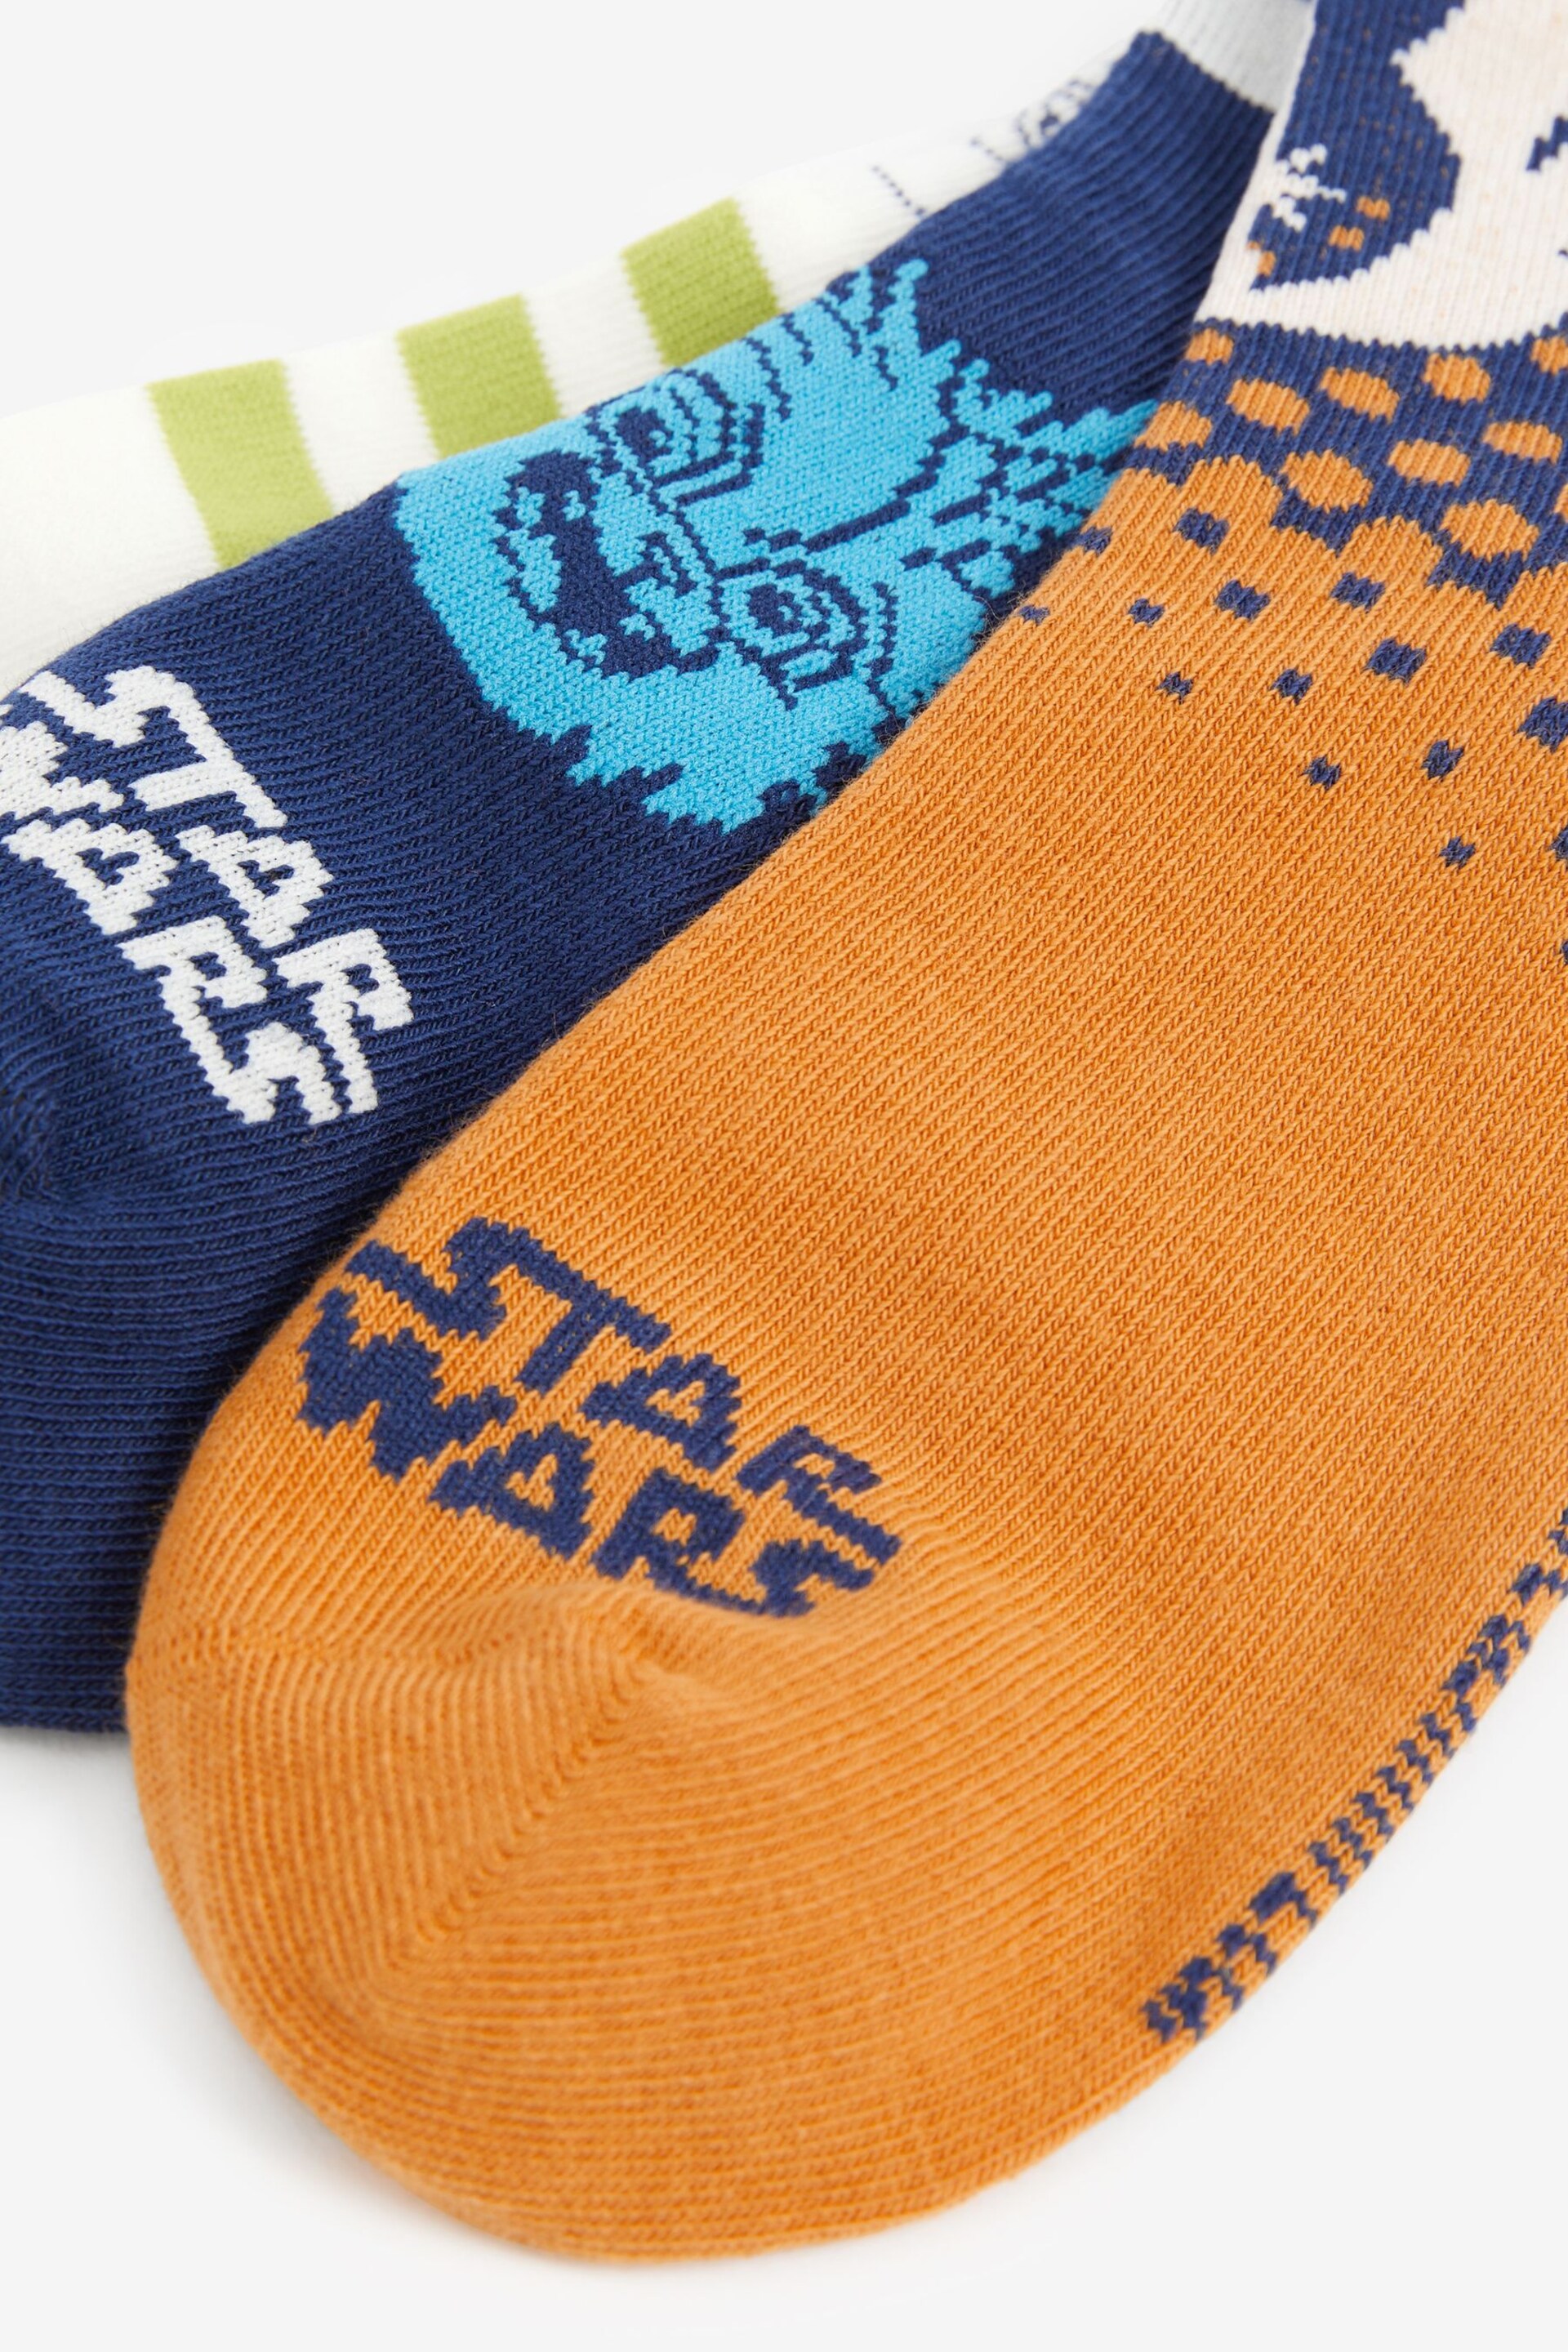 adidas Blue Star Wars Young Jedi Socks 3 Pack - Image 3 of 7